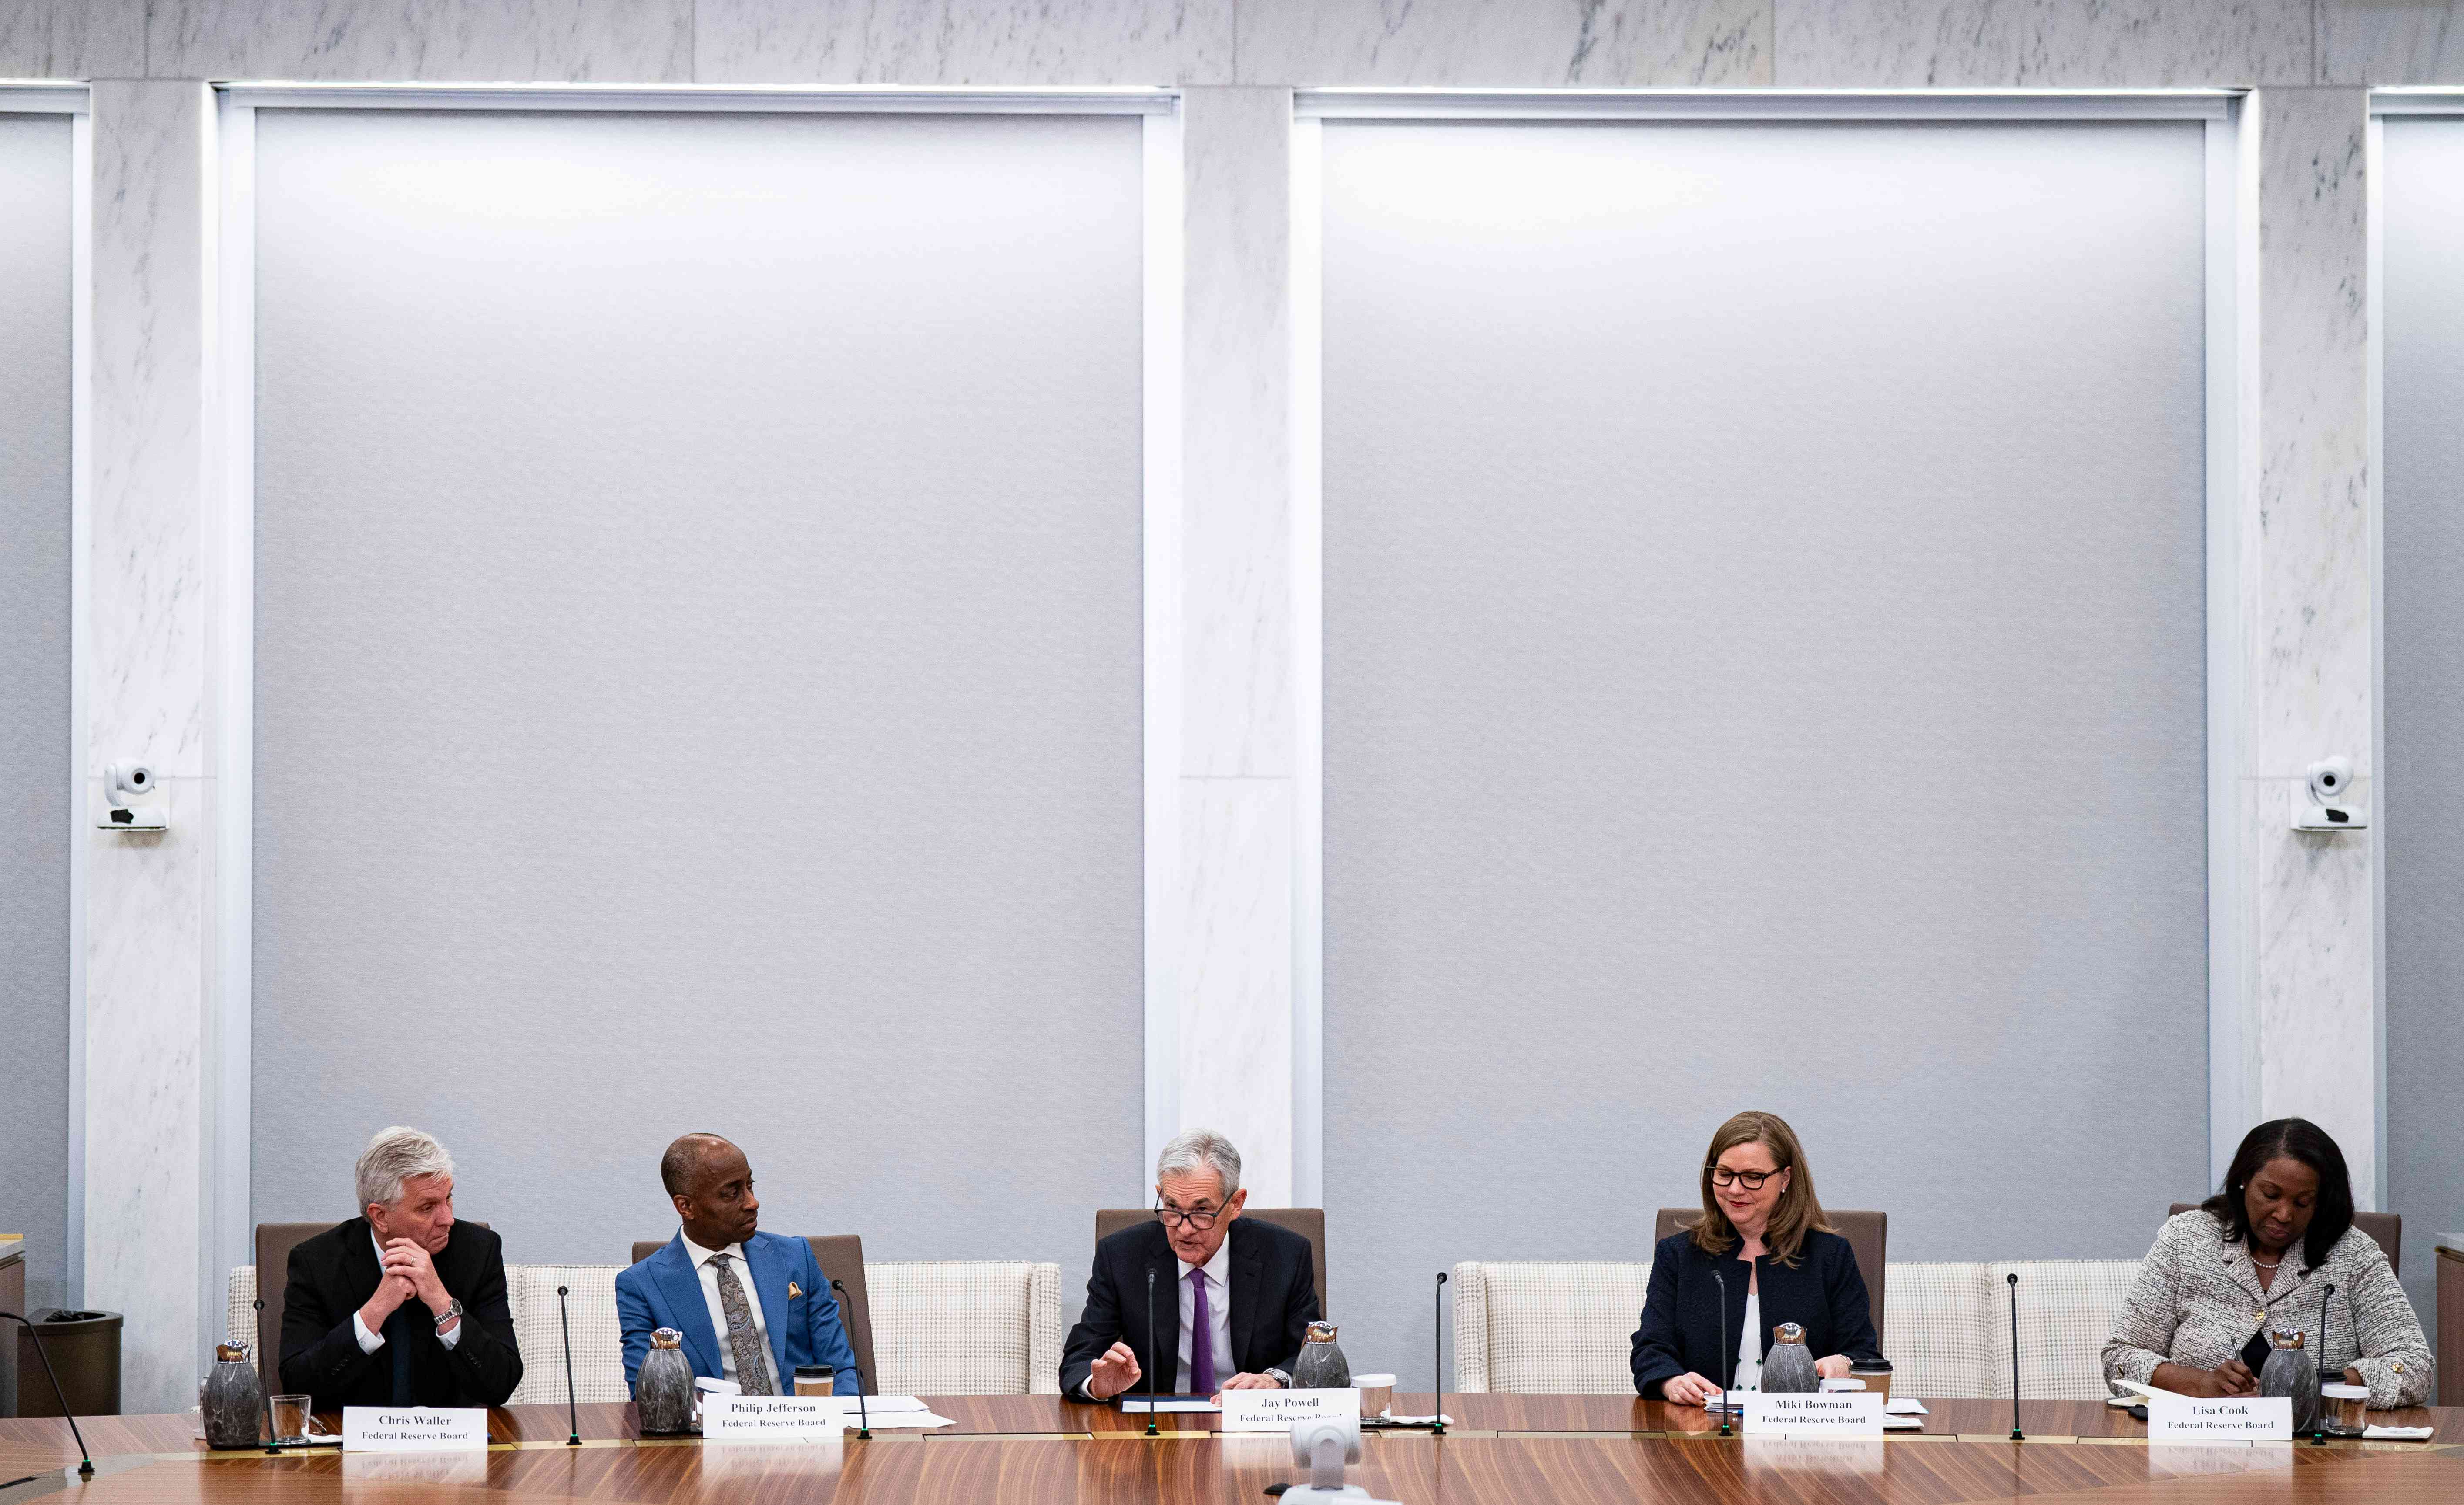 Christopher Waller, governor of the Federal Reserve; from left, Philip Jefferson, vice chair of the Federal Reserve System; Jerome Powell, chairman of the Federal Reserve; Michelle Bowman, governor of the Federal Reserve; and Lisa Cook, governor of the Federal Reserve, during a Fed Listens event in Washington, D.C., on March 22, 2024.